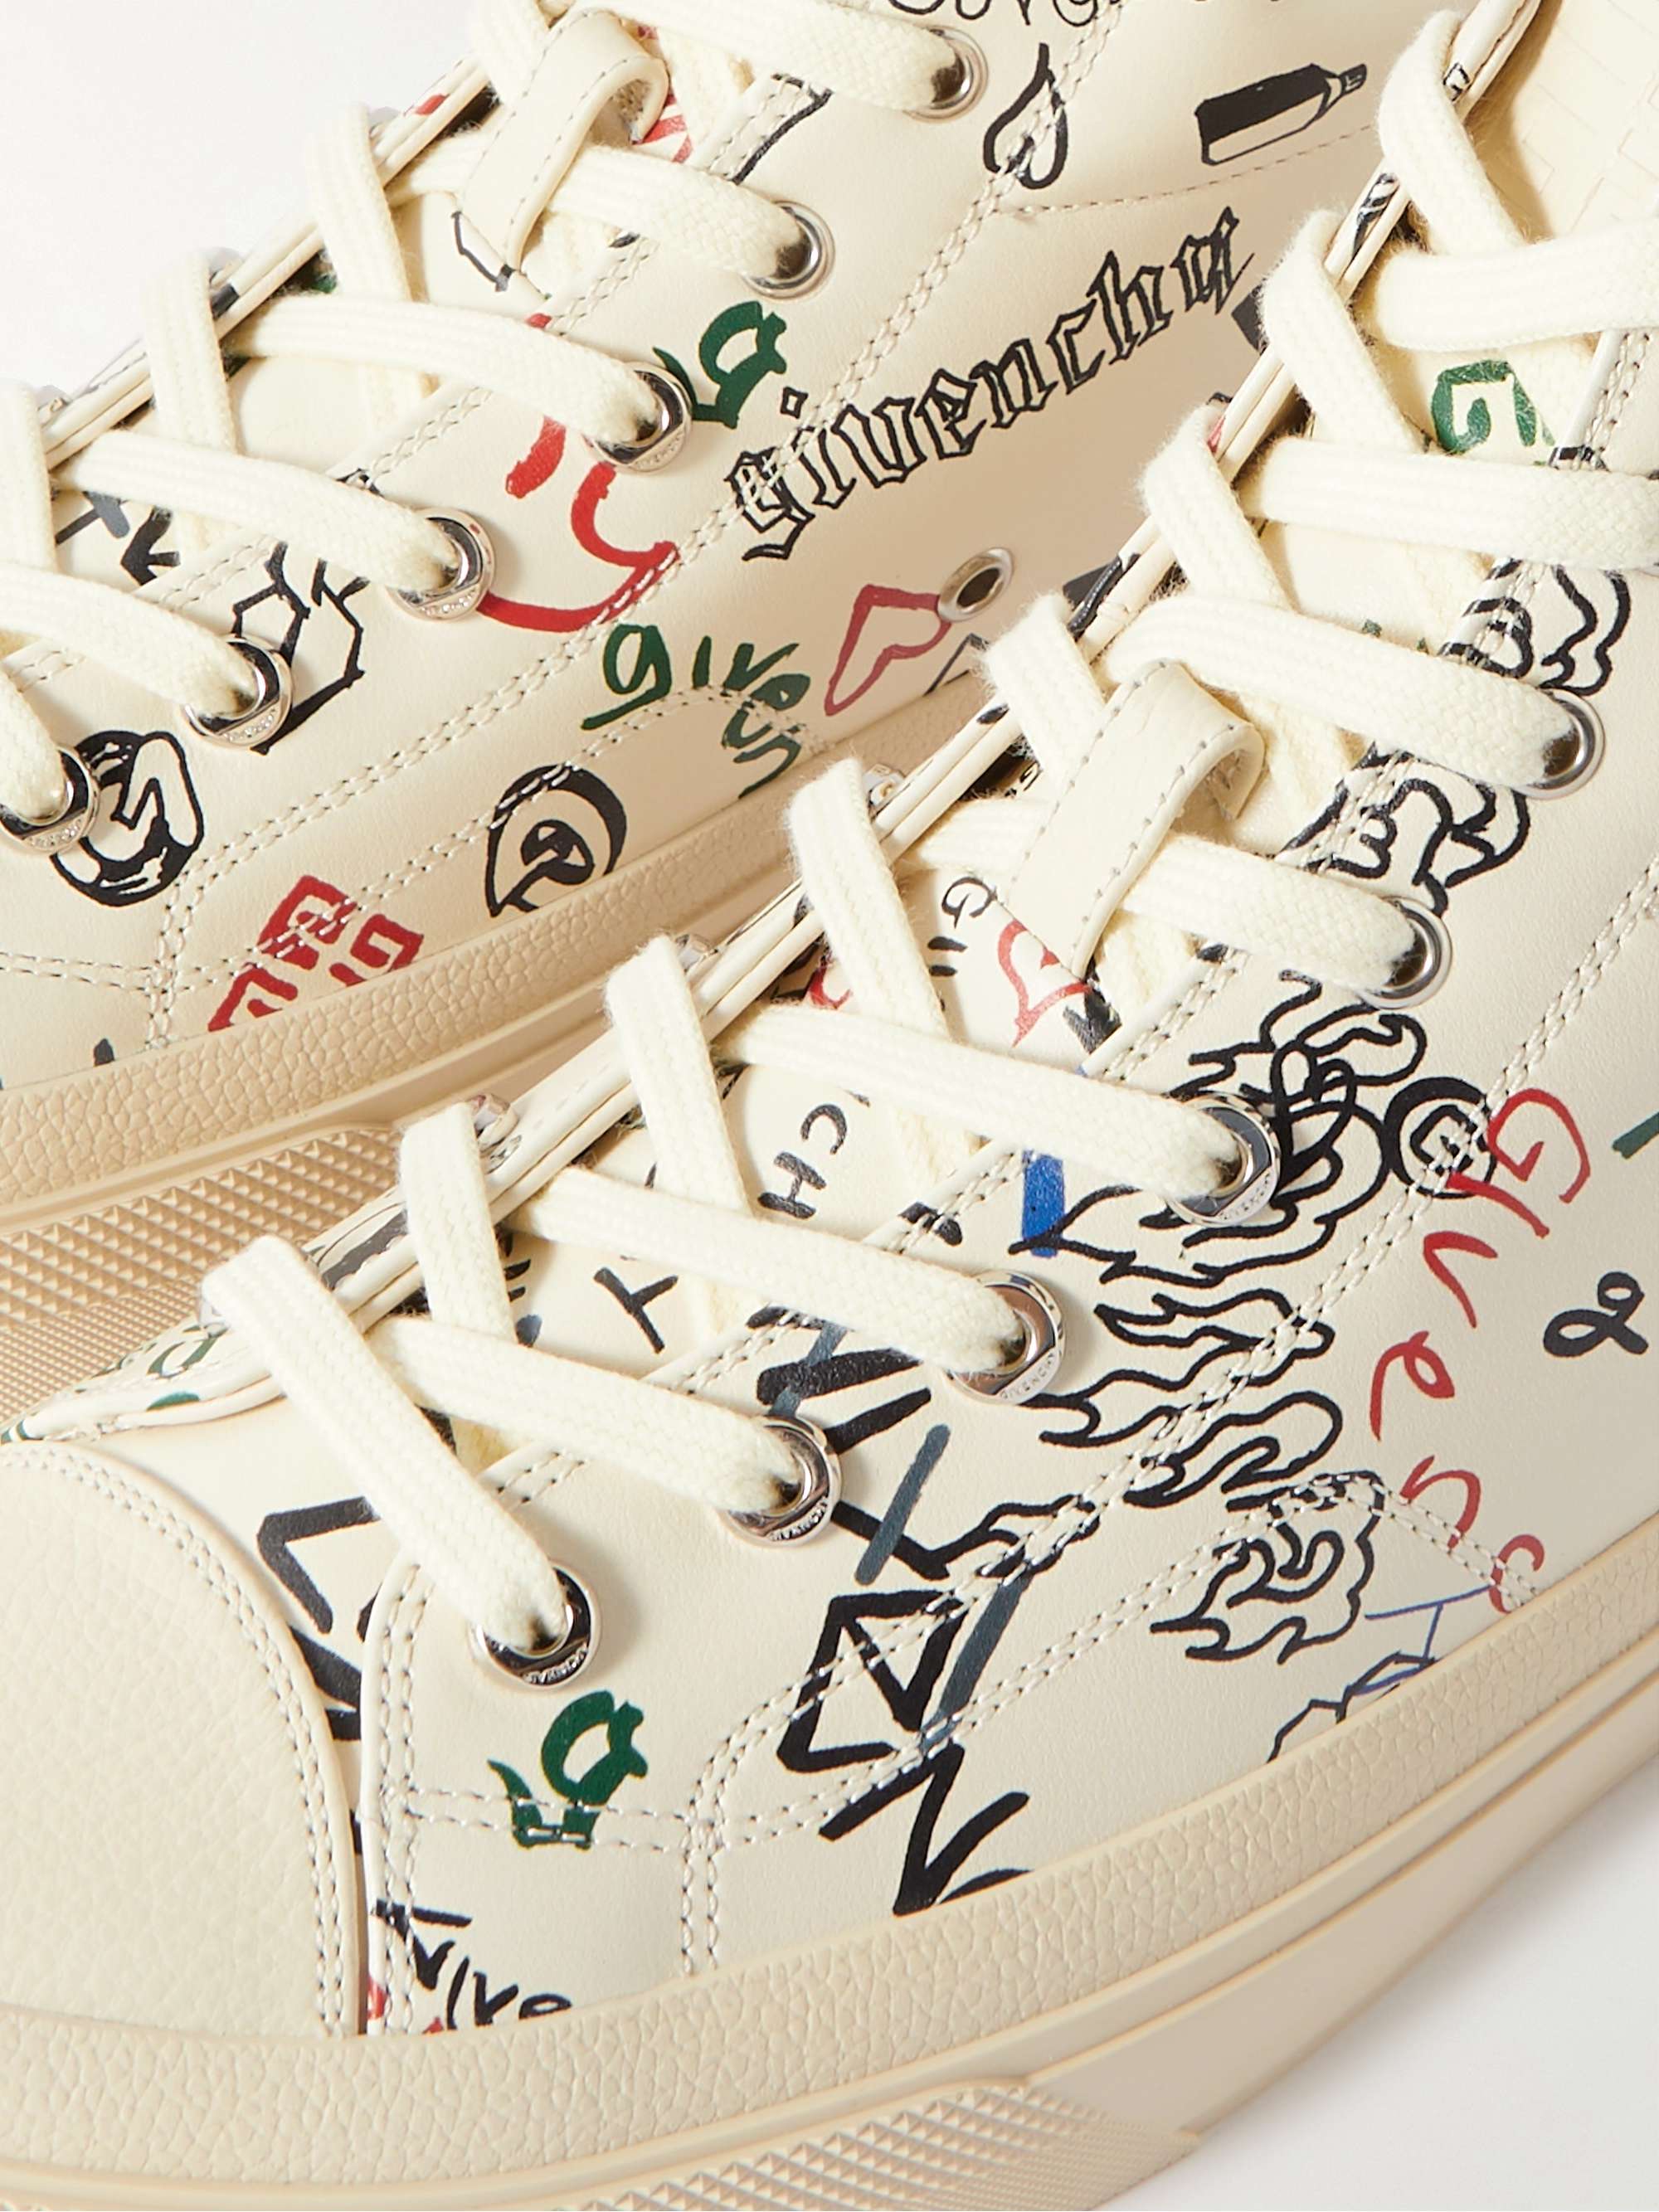 GIVENCHY City Logo-Print Leather Sneakers